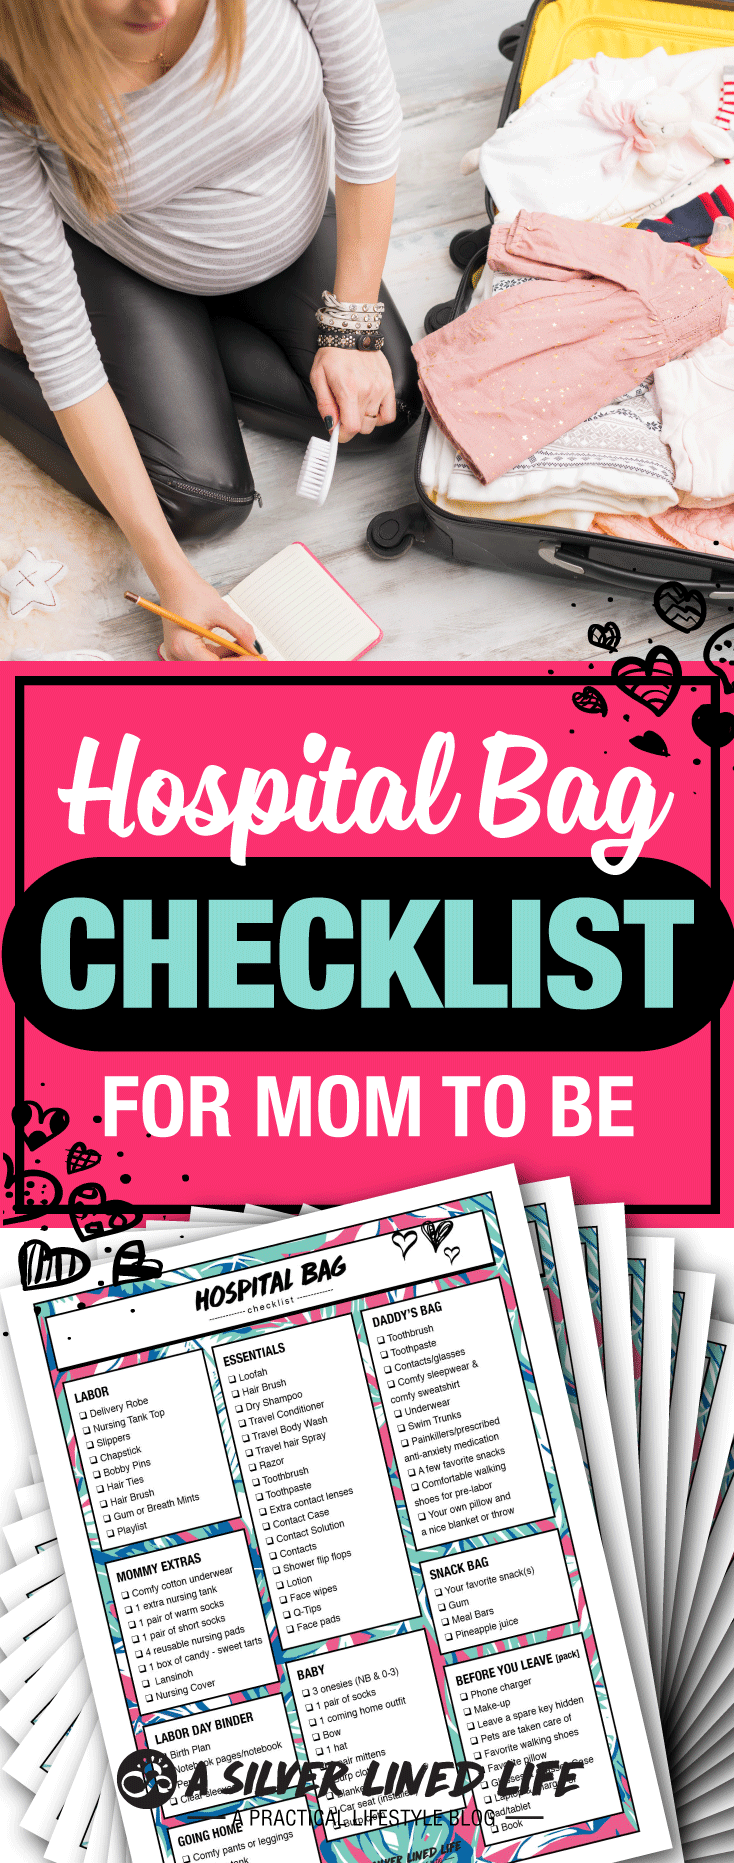 Your Hospital Bag Checklist: FREE Downloadable